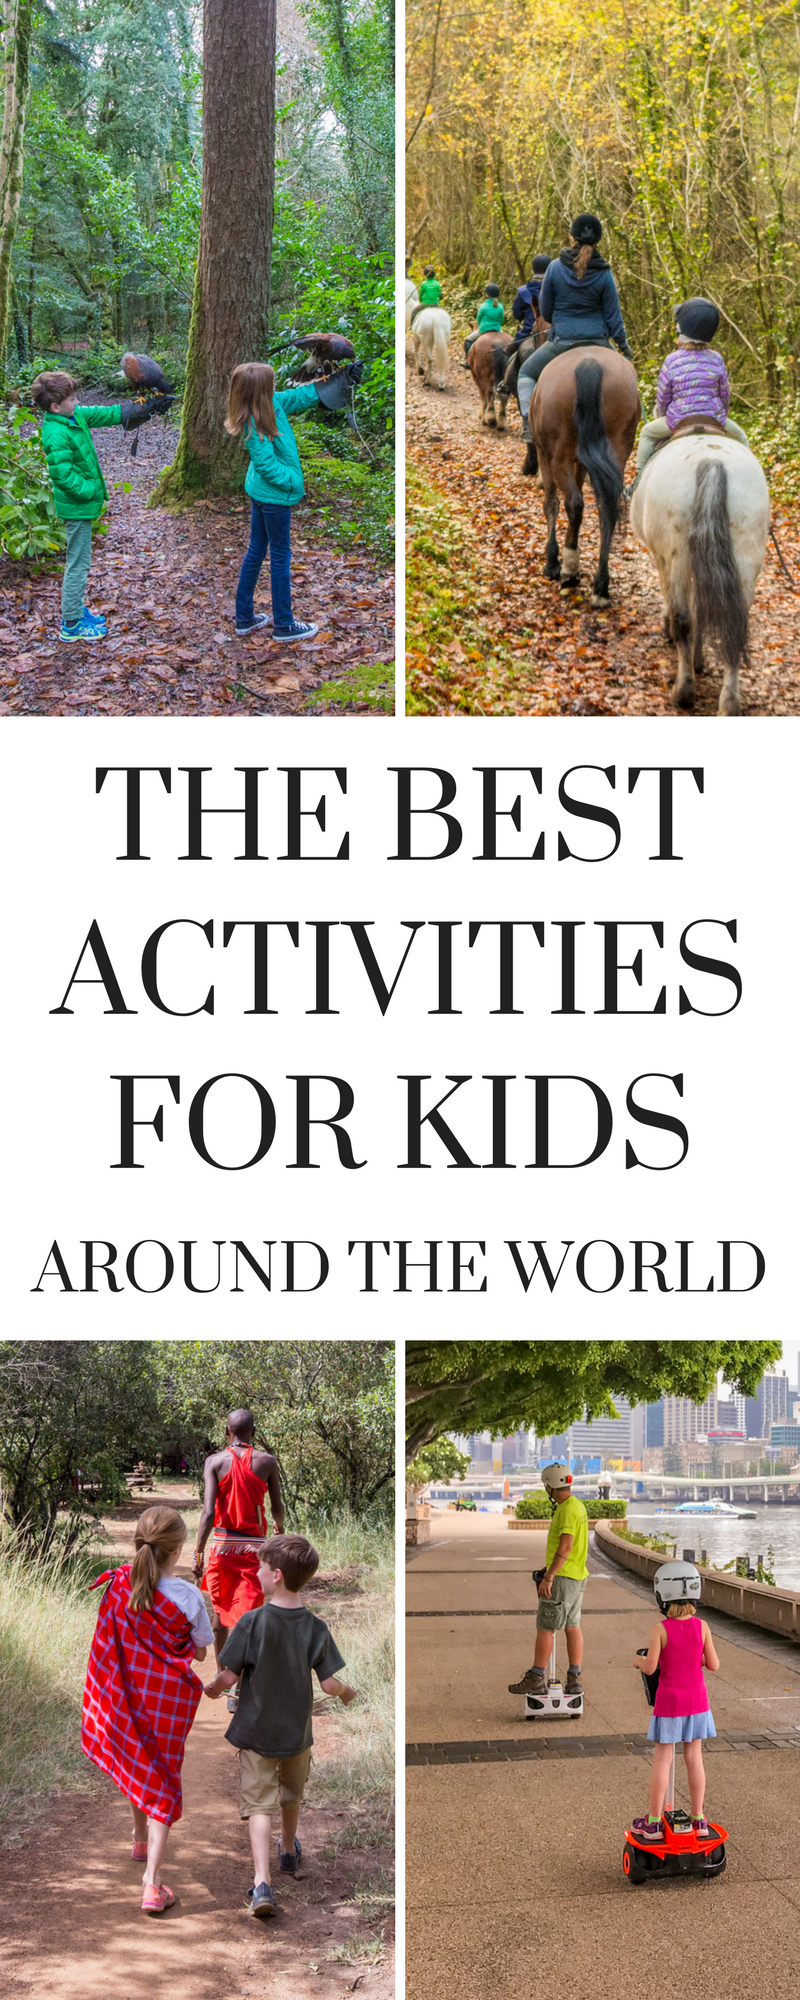 We're always searching for the coolest family-friendly activities everywhere we travel. Here are our top ten best kid activities that we've found.